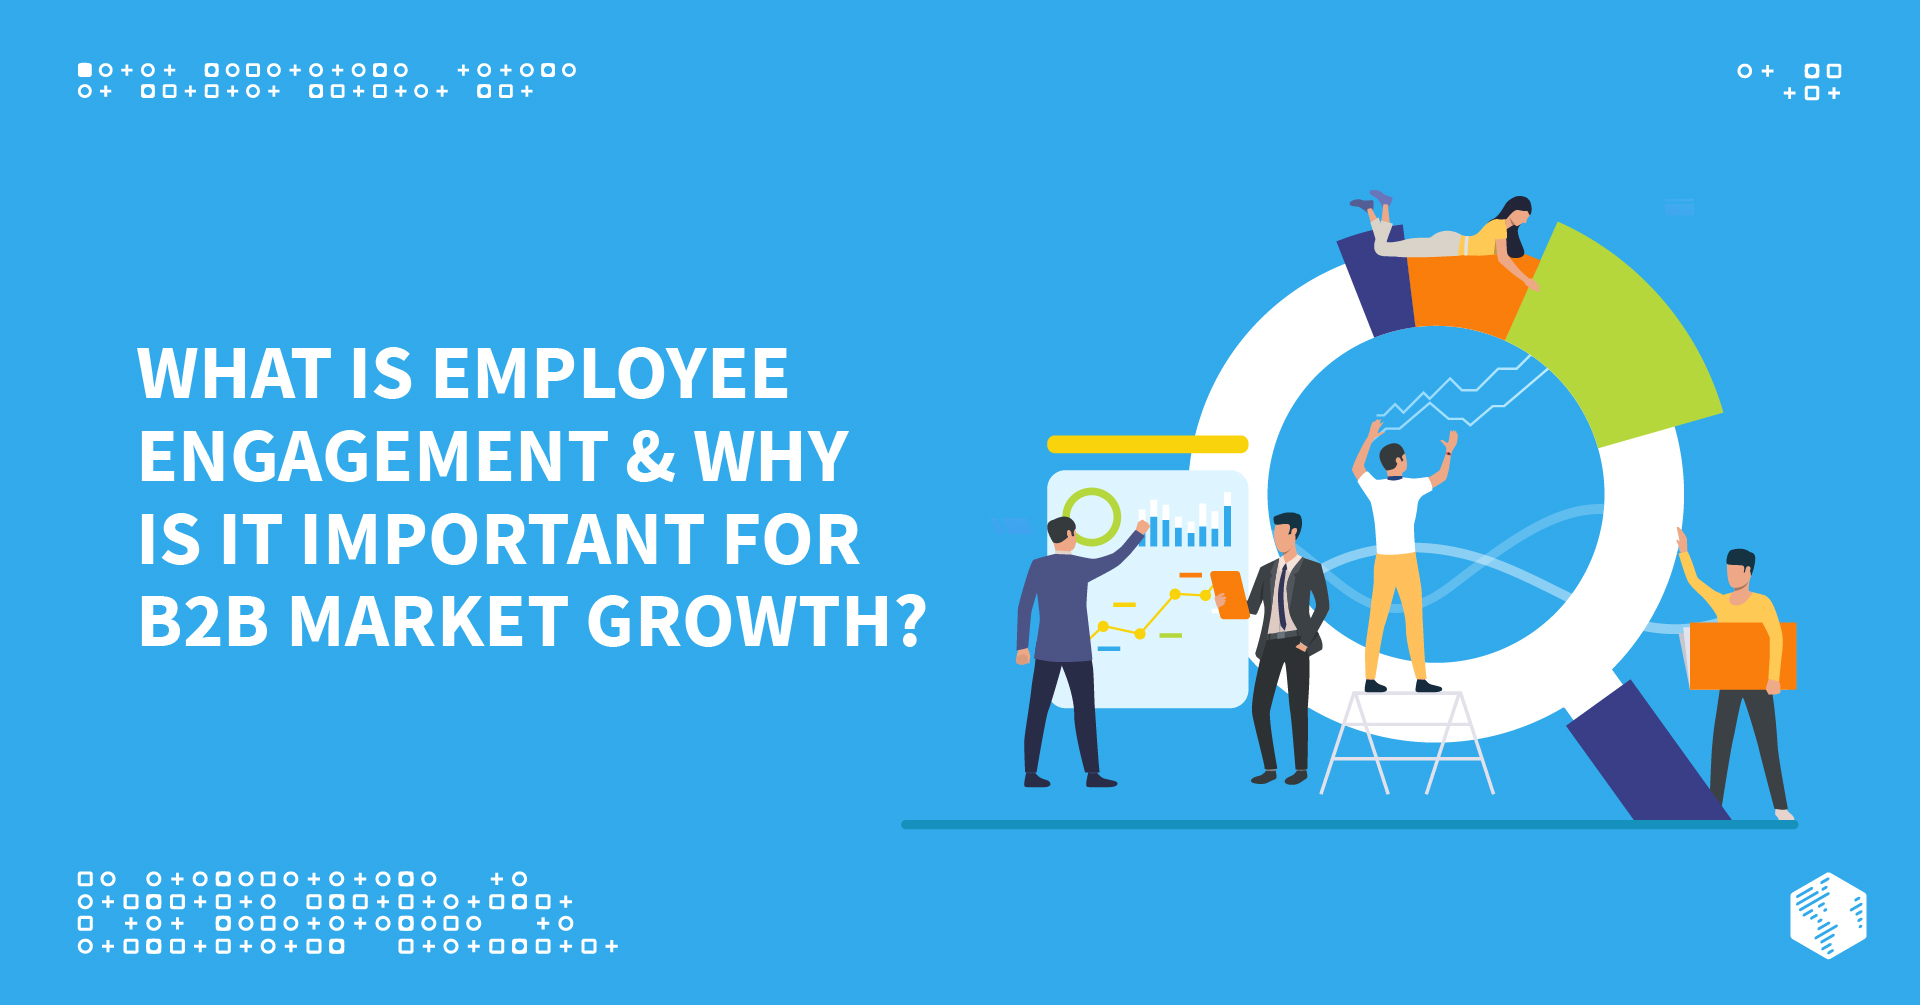 What Is Employee Engagement & Why Is It Important for B2B Market Growth?